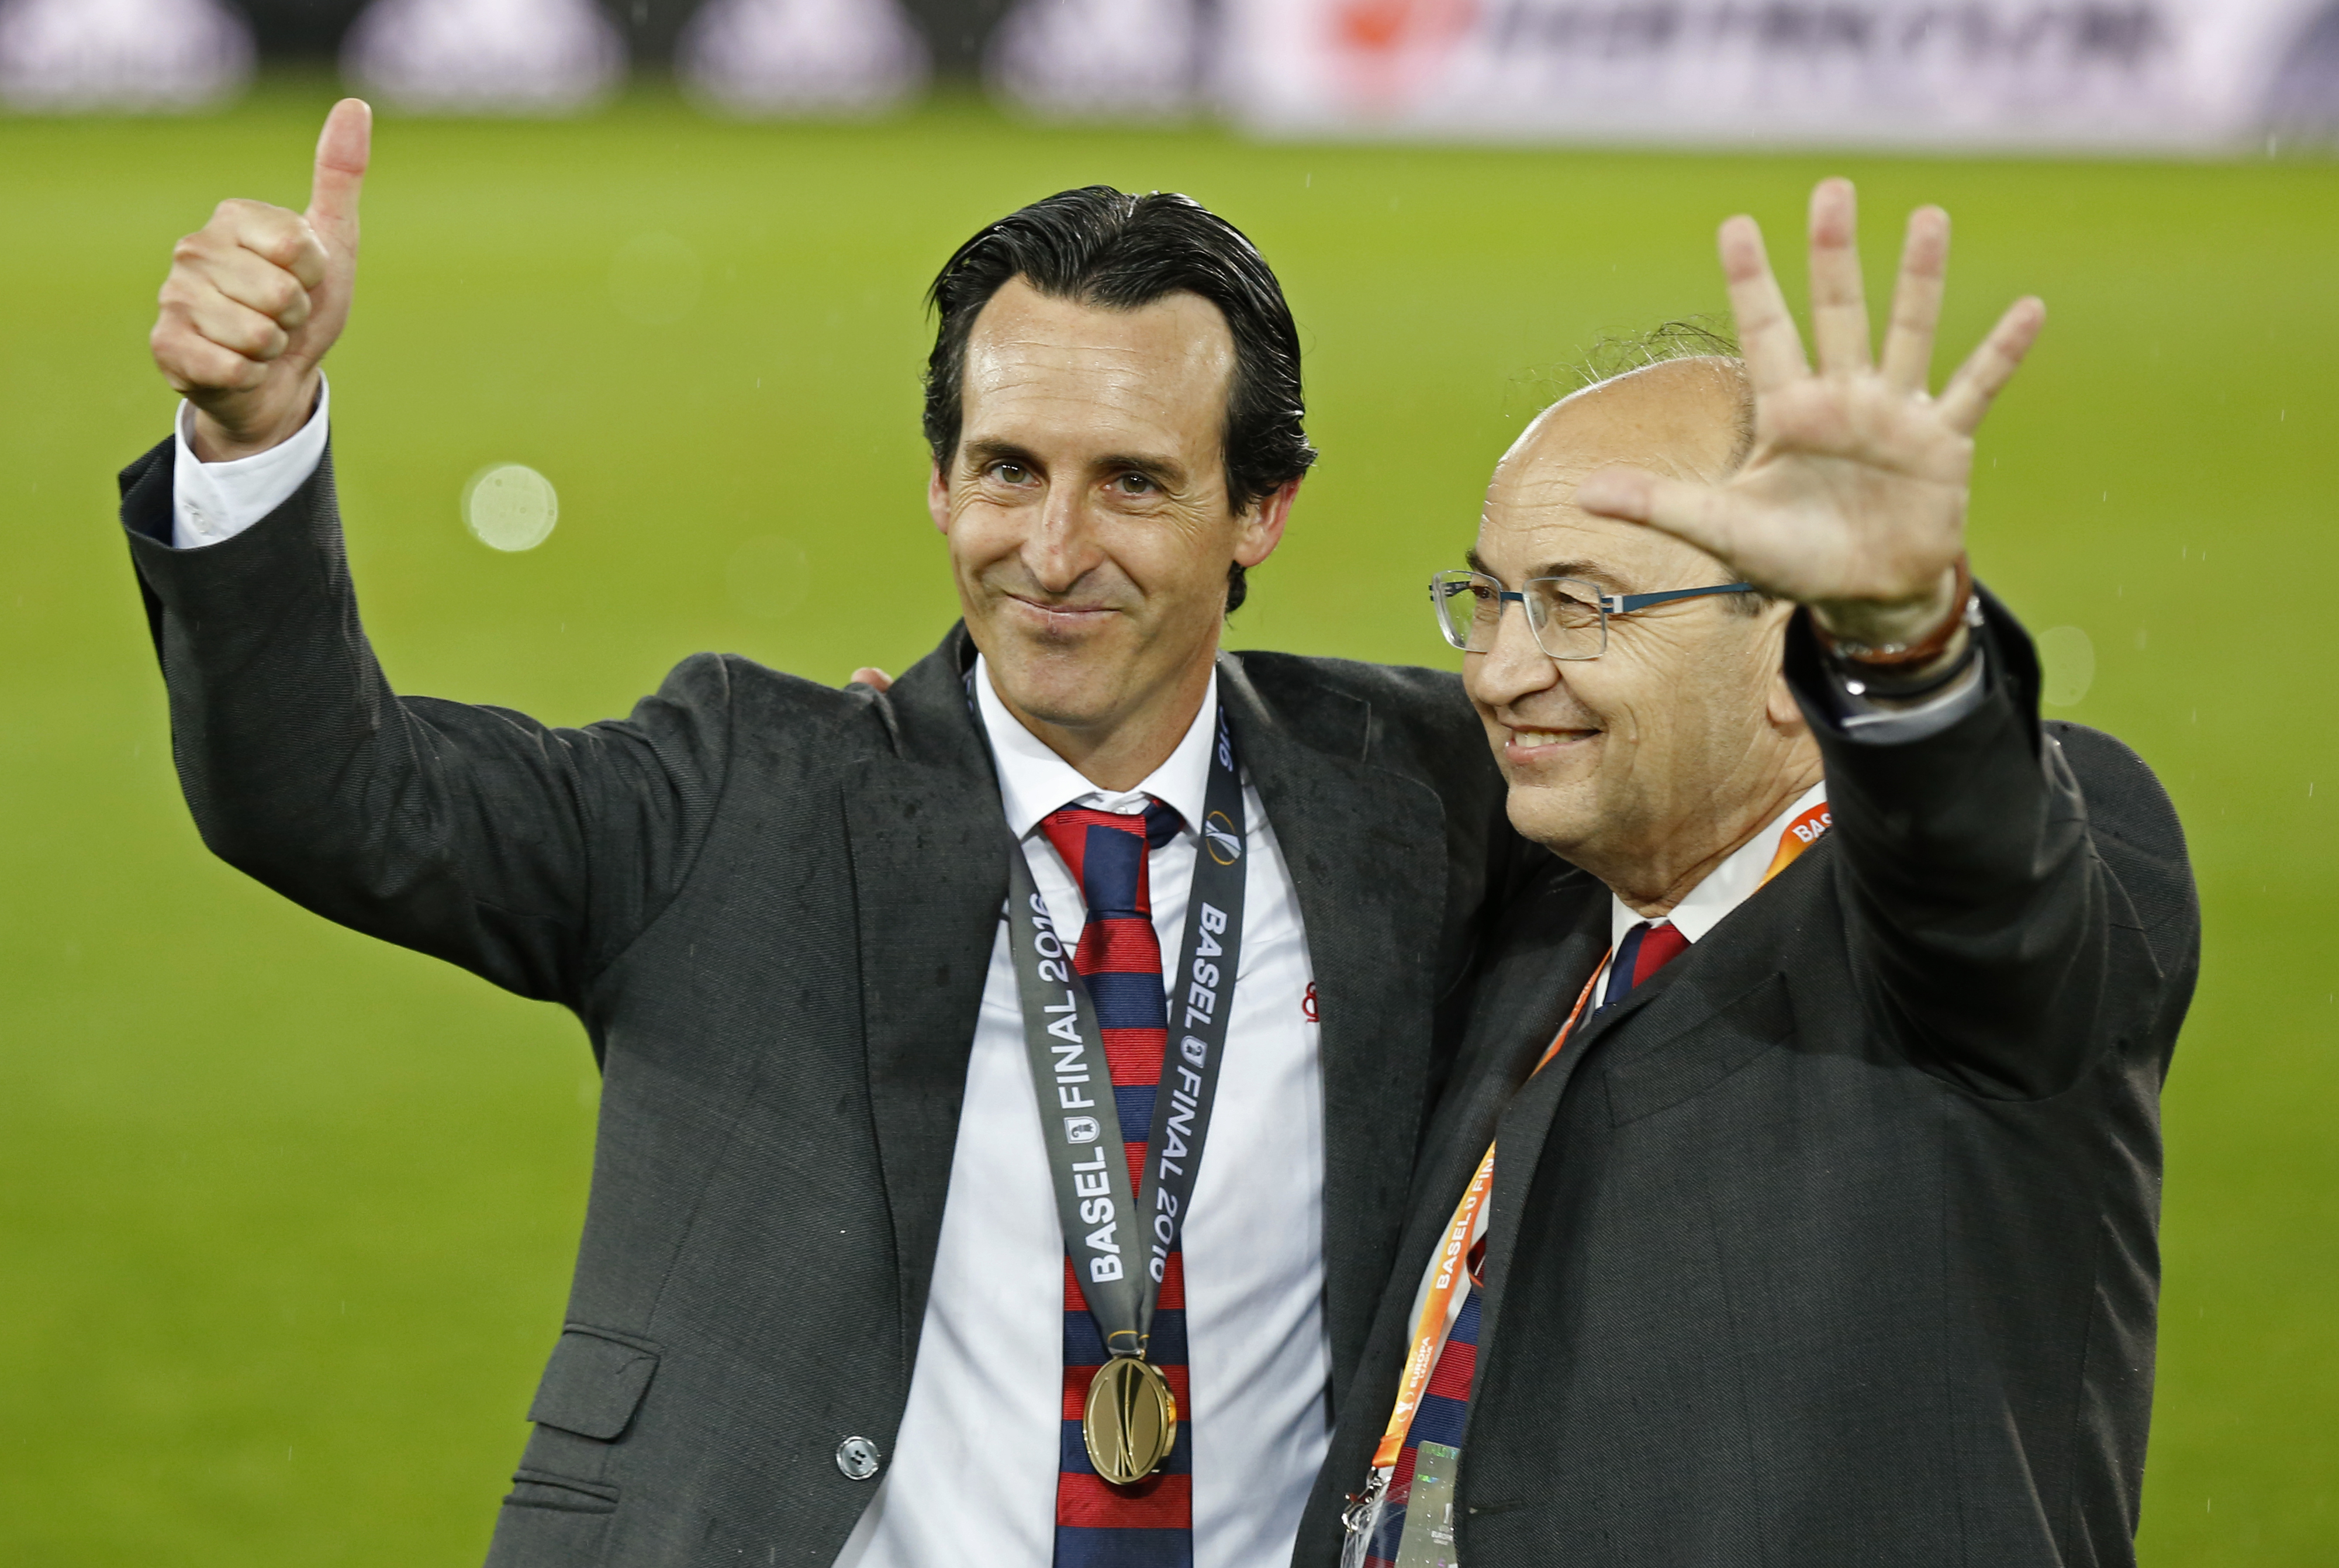 Football Soccer - Liverpool v Sevilla - UEFA Europa League Final - St. Jakob-Park, Basel, Switzerland - 18/5/16 Sevilla coach Unai Emery and President Jose Castro Carmona celebrate after the game Reuters / Marcelo del Pozo Livepic EDITORIAL USE ONLY.